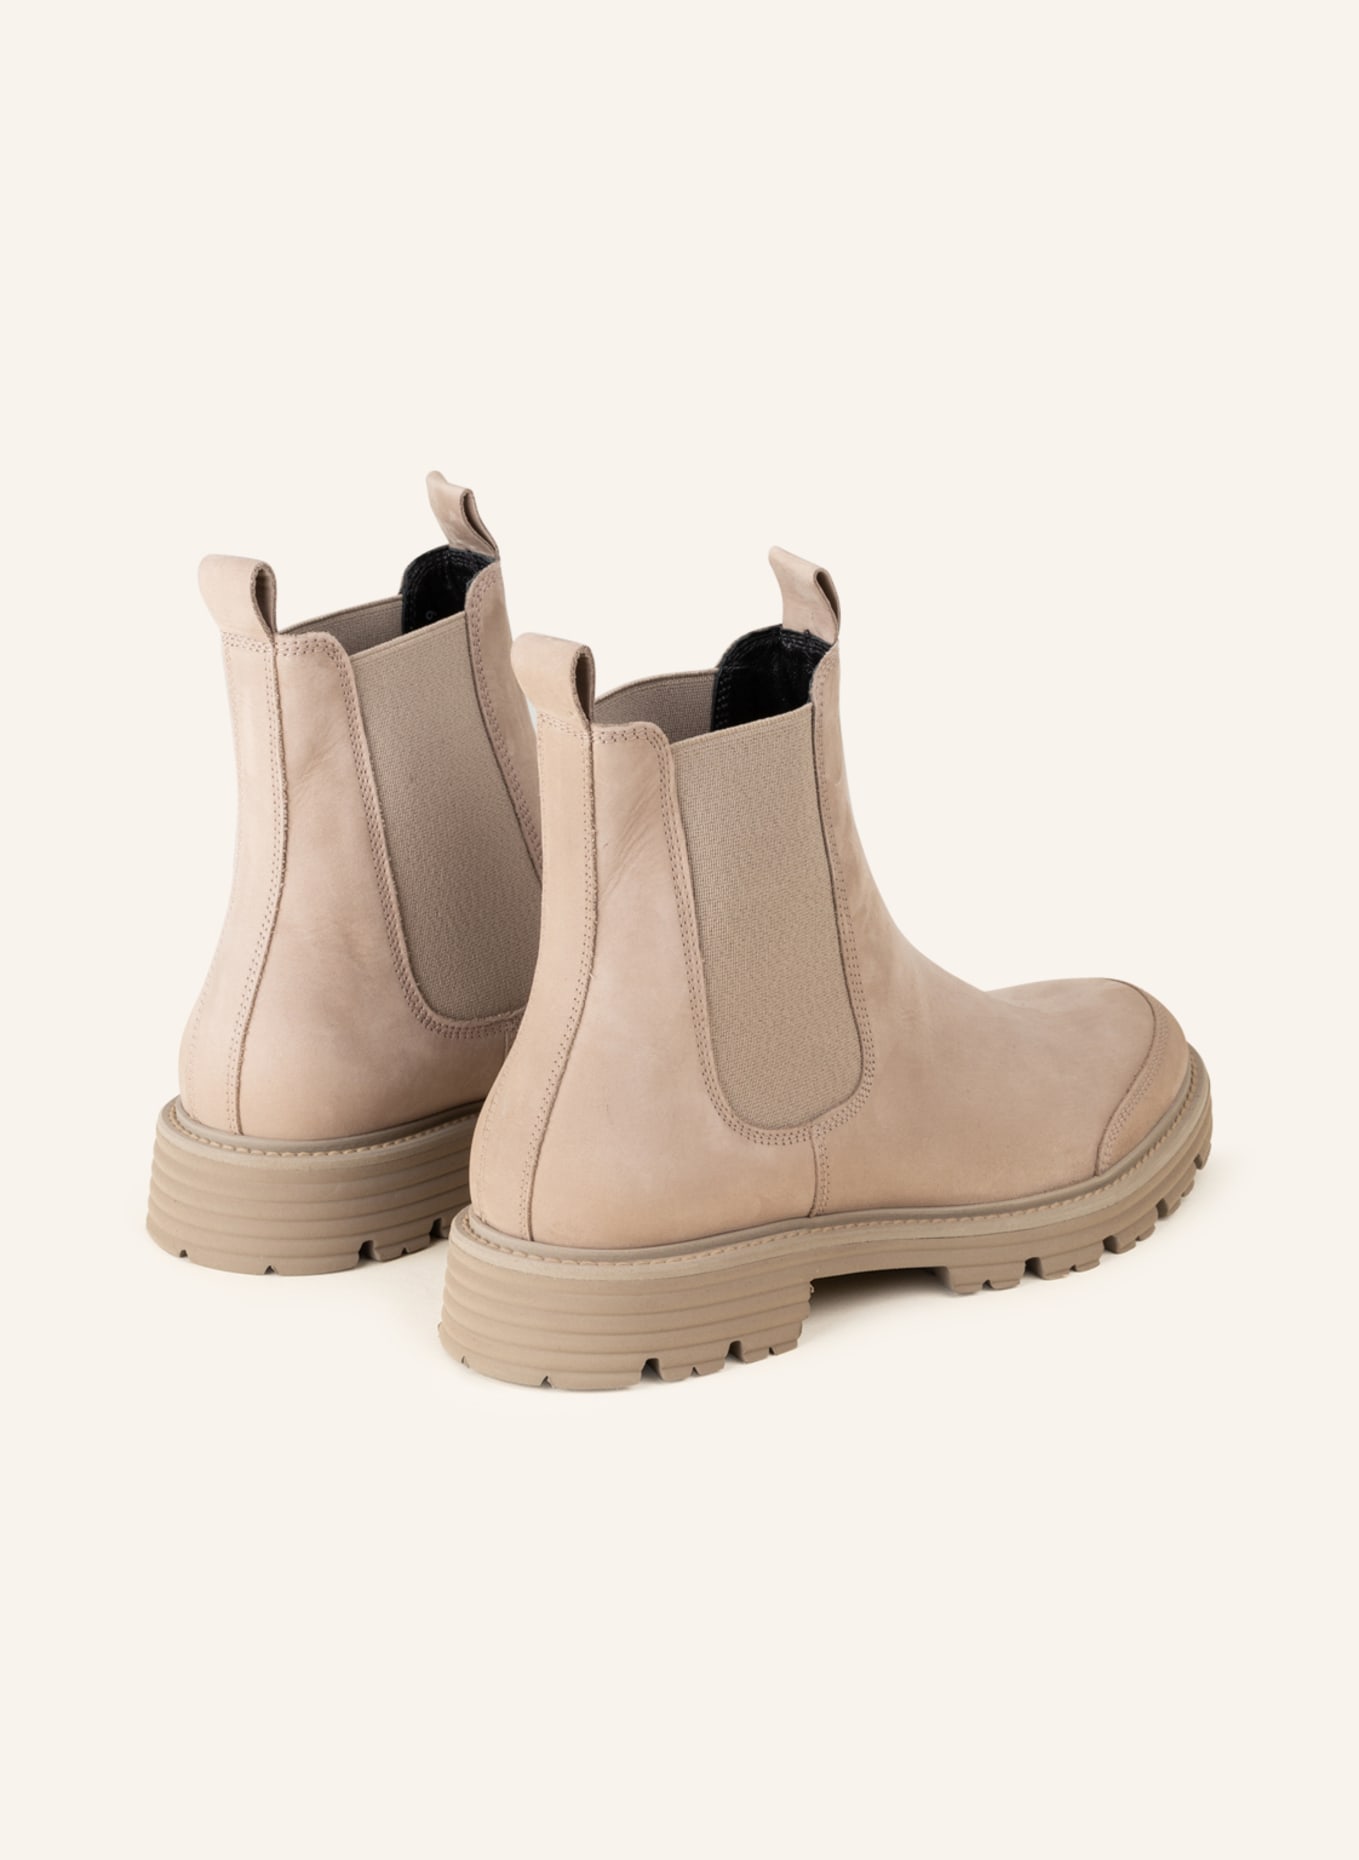 KENNEL & SCHMENGER Chelsea-Boots POWER, Farbe: TAUPE (Bild 2)